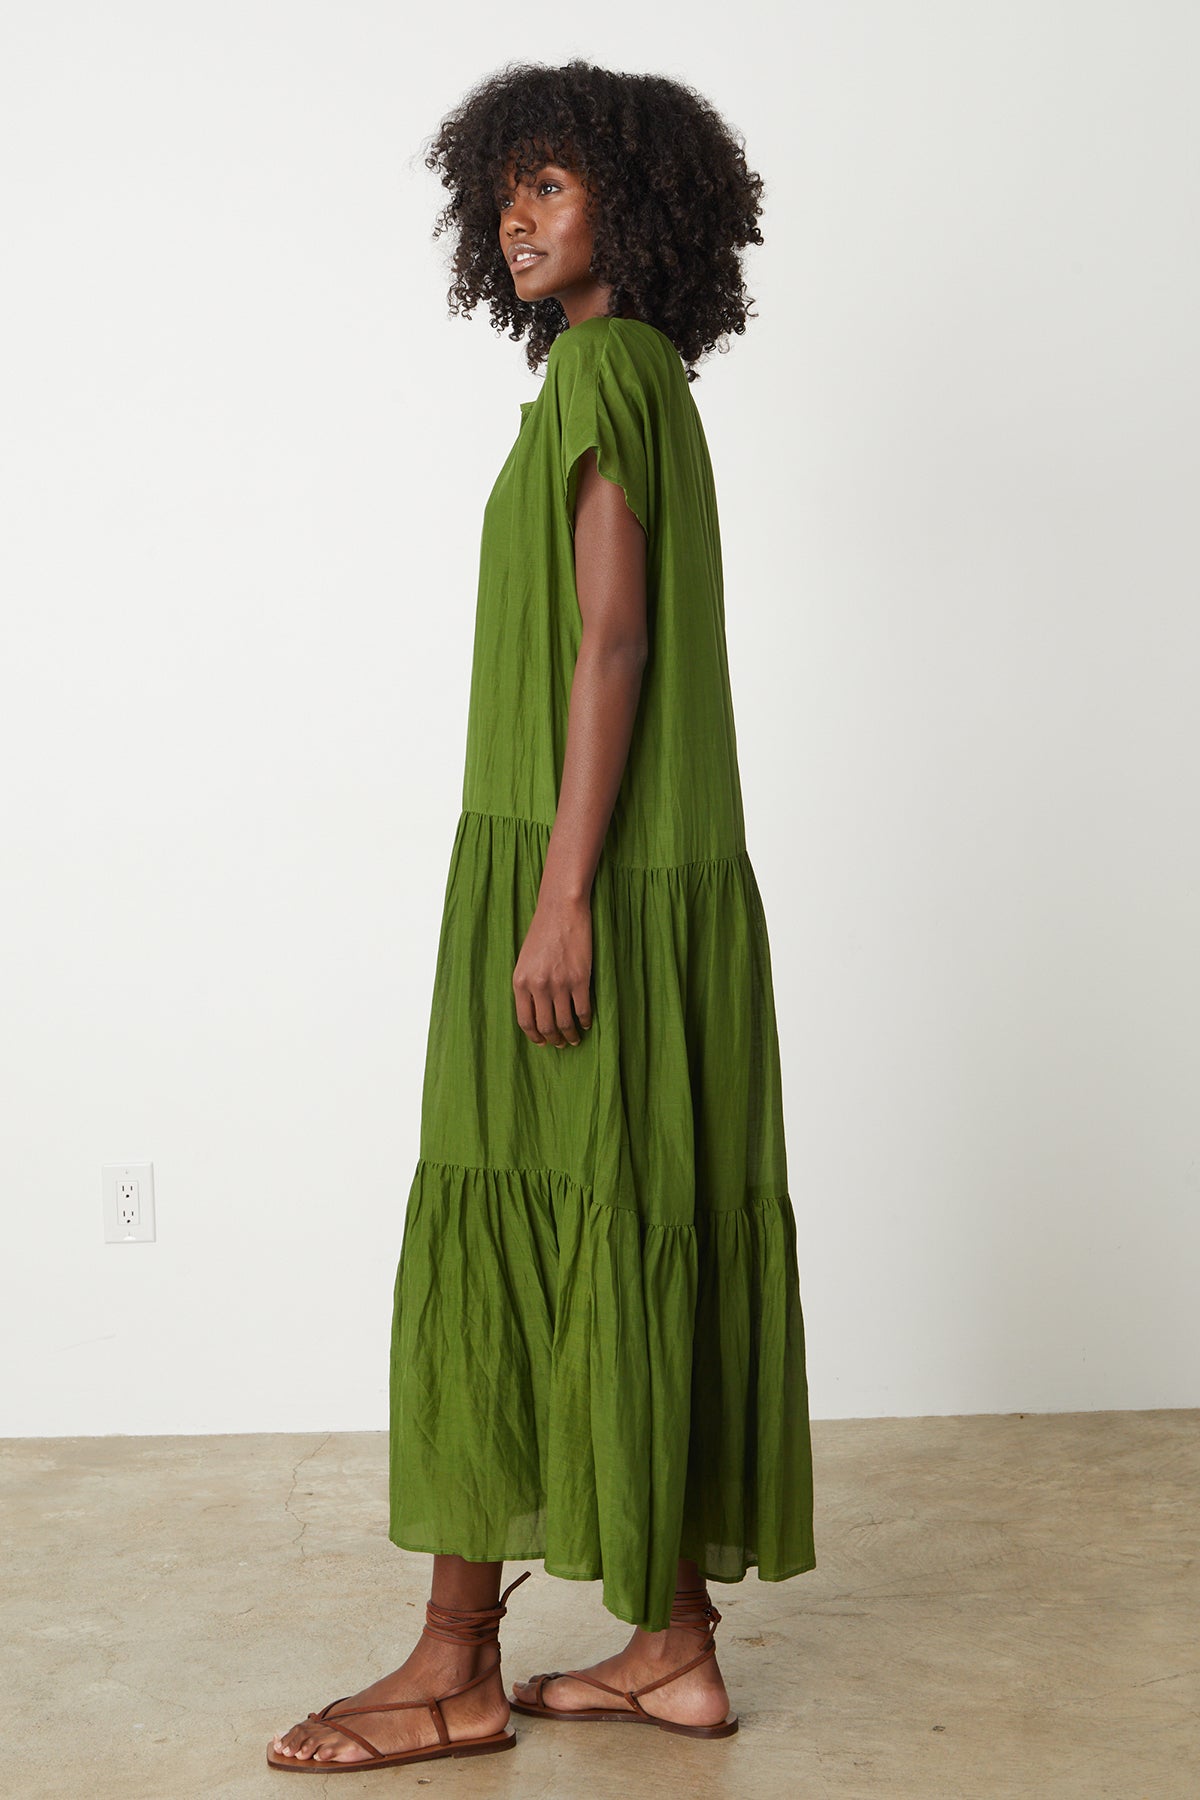 The model is wearing a ADA TIERED MAXI DRESS dress with ruffled ruffles by Velvet by Graham & Spencer.-26342688751809